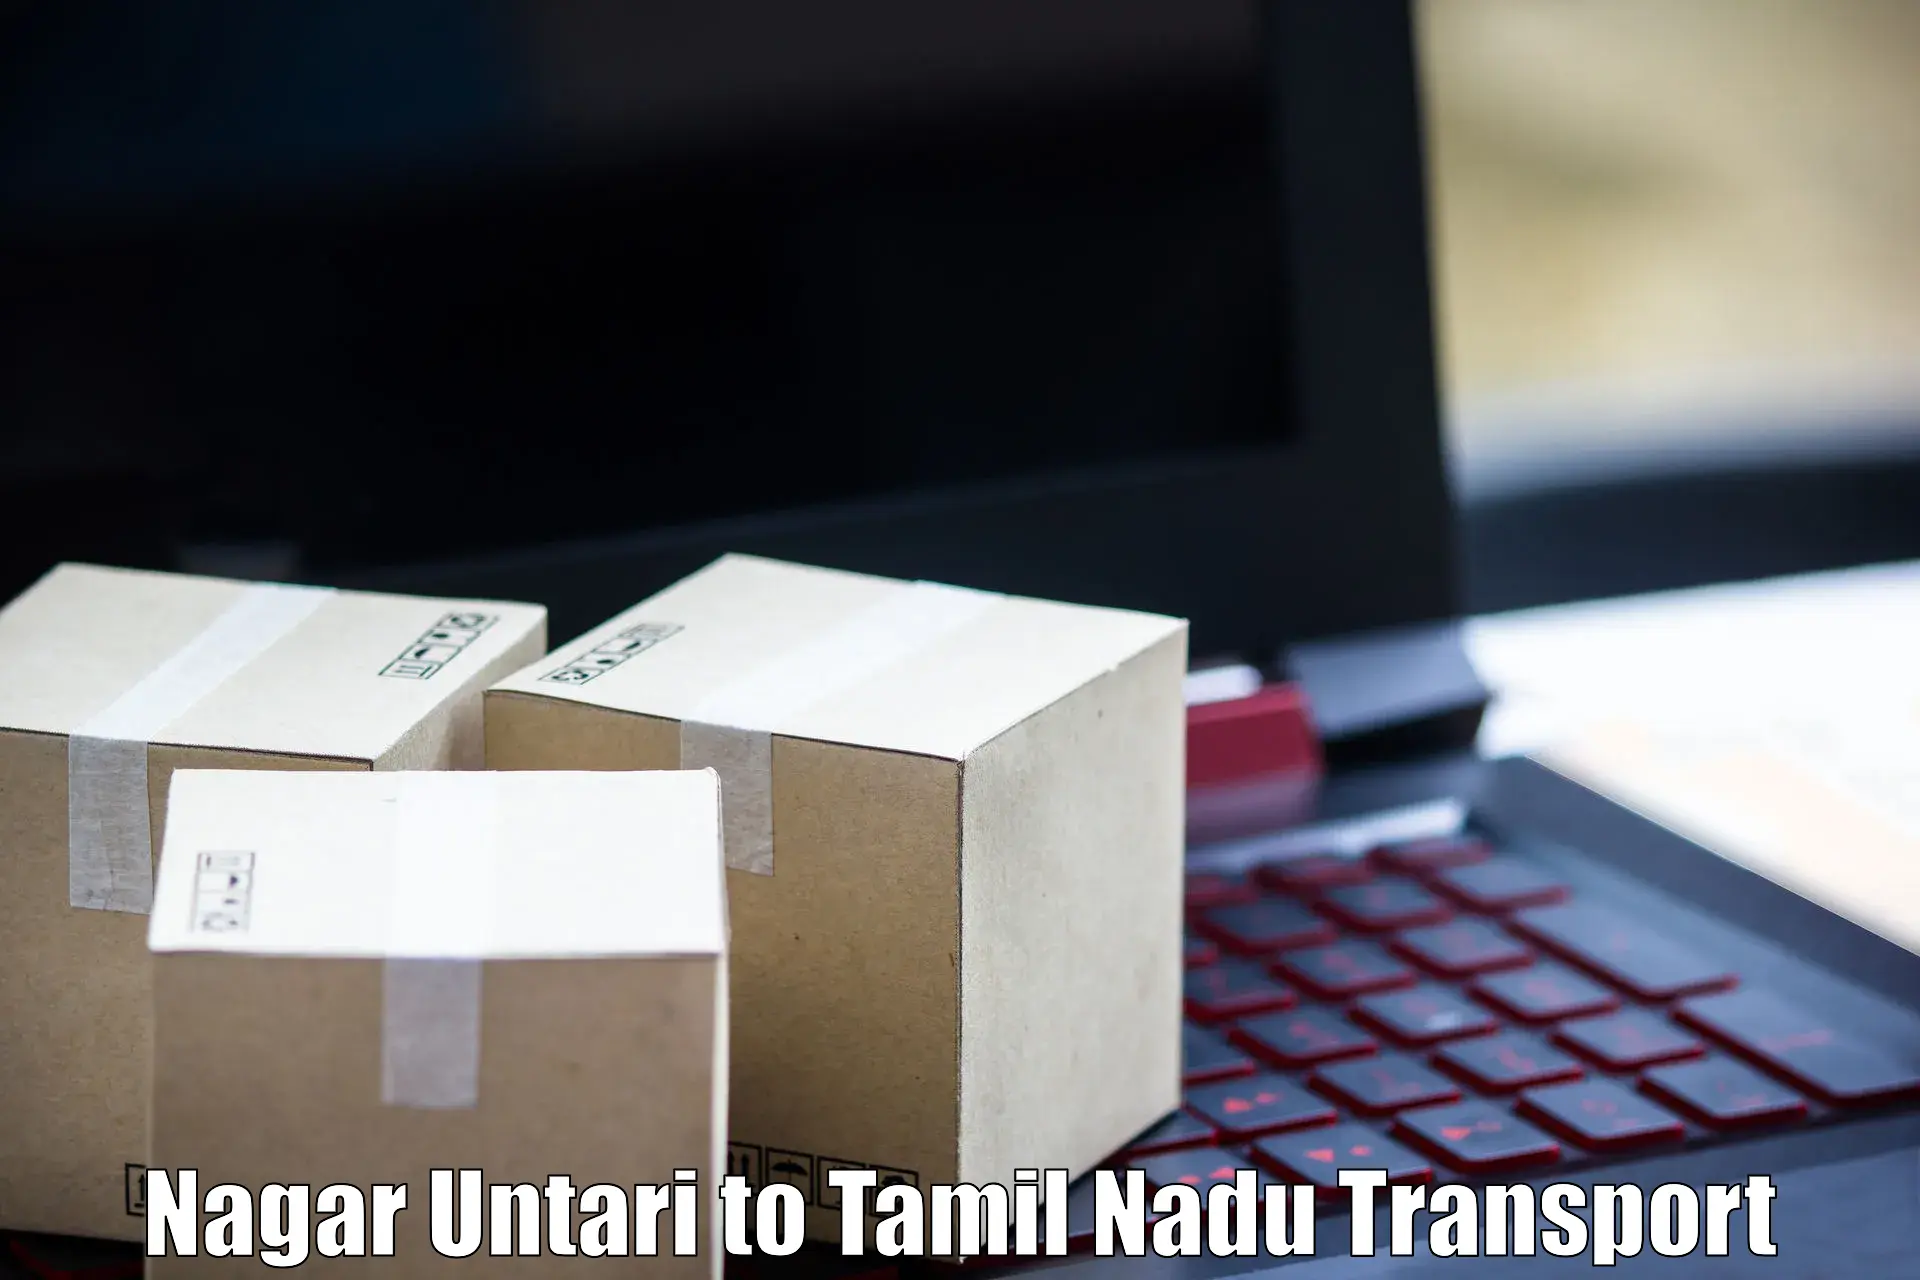 Shipping services in Nagar Untari to Shanmugha Arts Science Technology and Research Academy Thanjavur